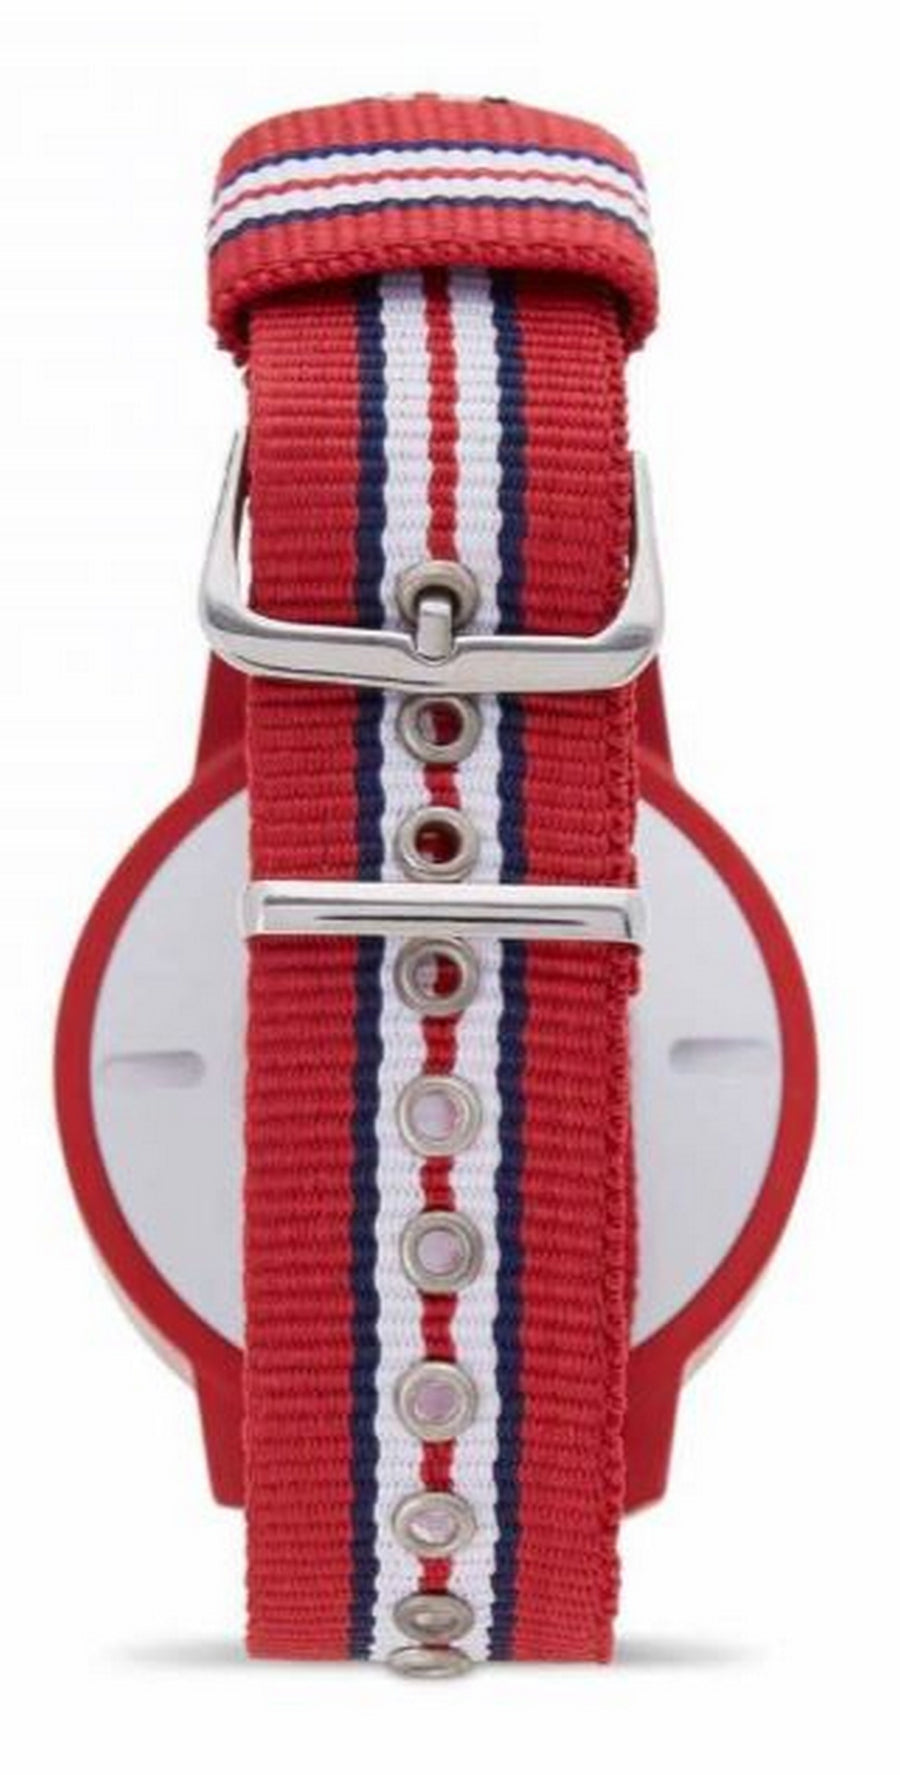 ATOP WORLD TIME WATCH RED AWA-05-C0910 - Gifted Products